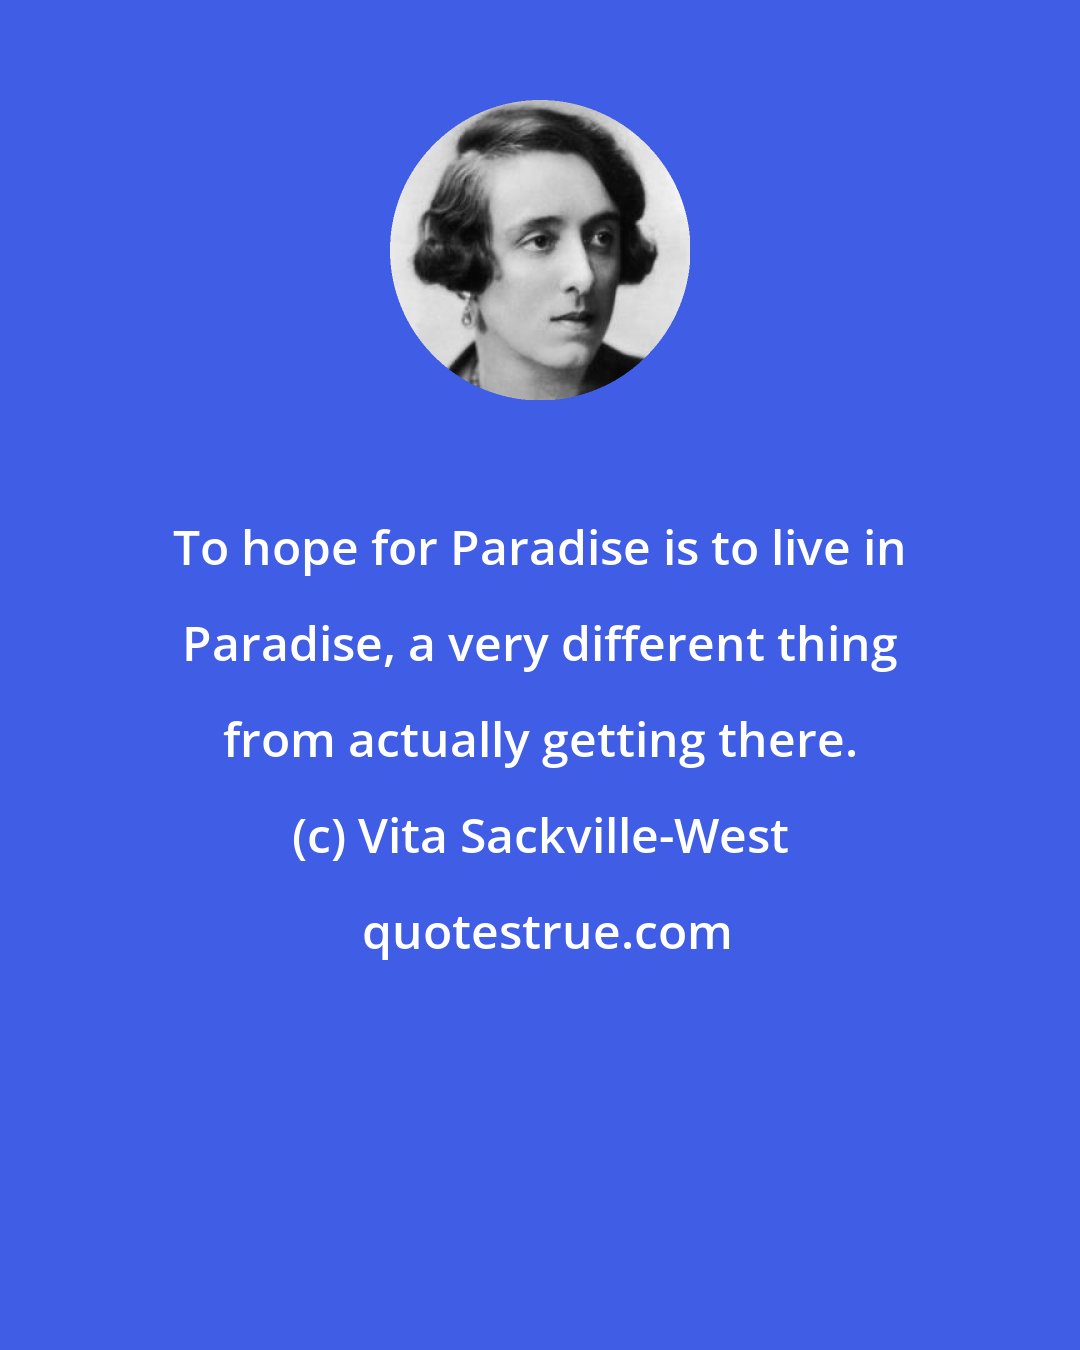 Vita Sackville-West: To hope for Paradise is to live in Paradise, a very different thing from actually getting there.